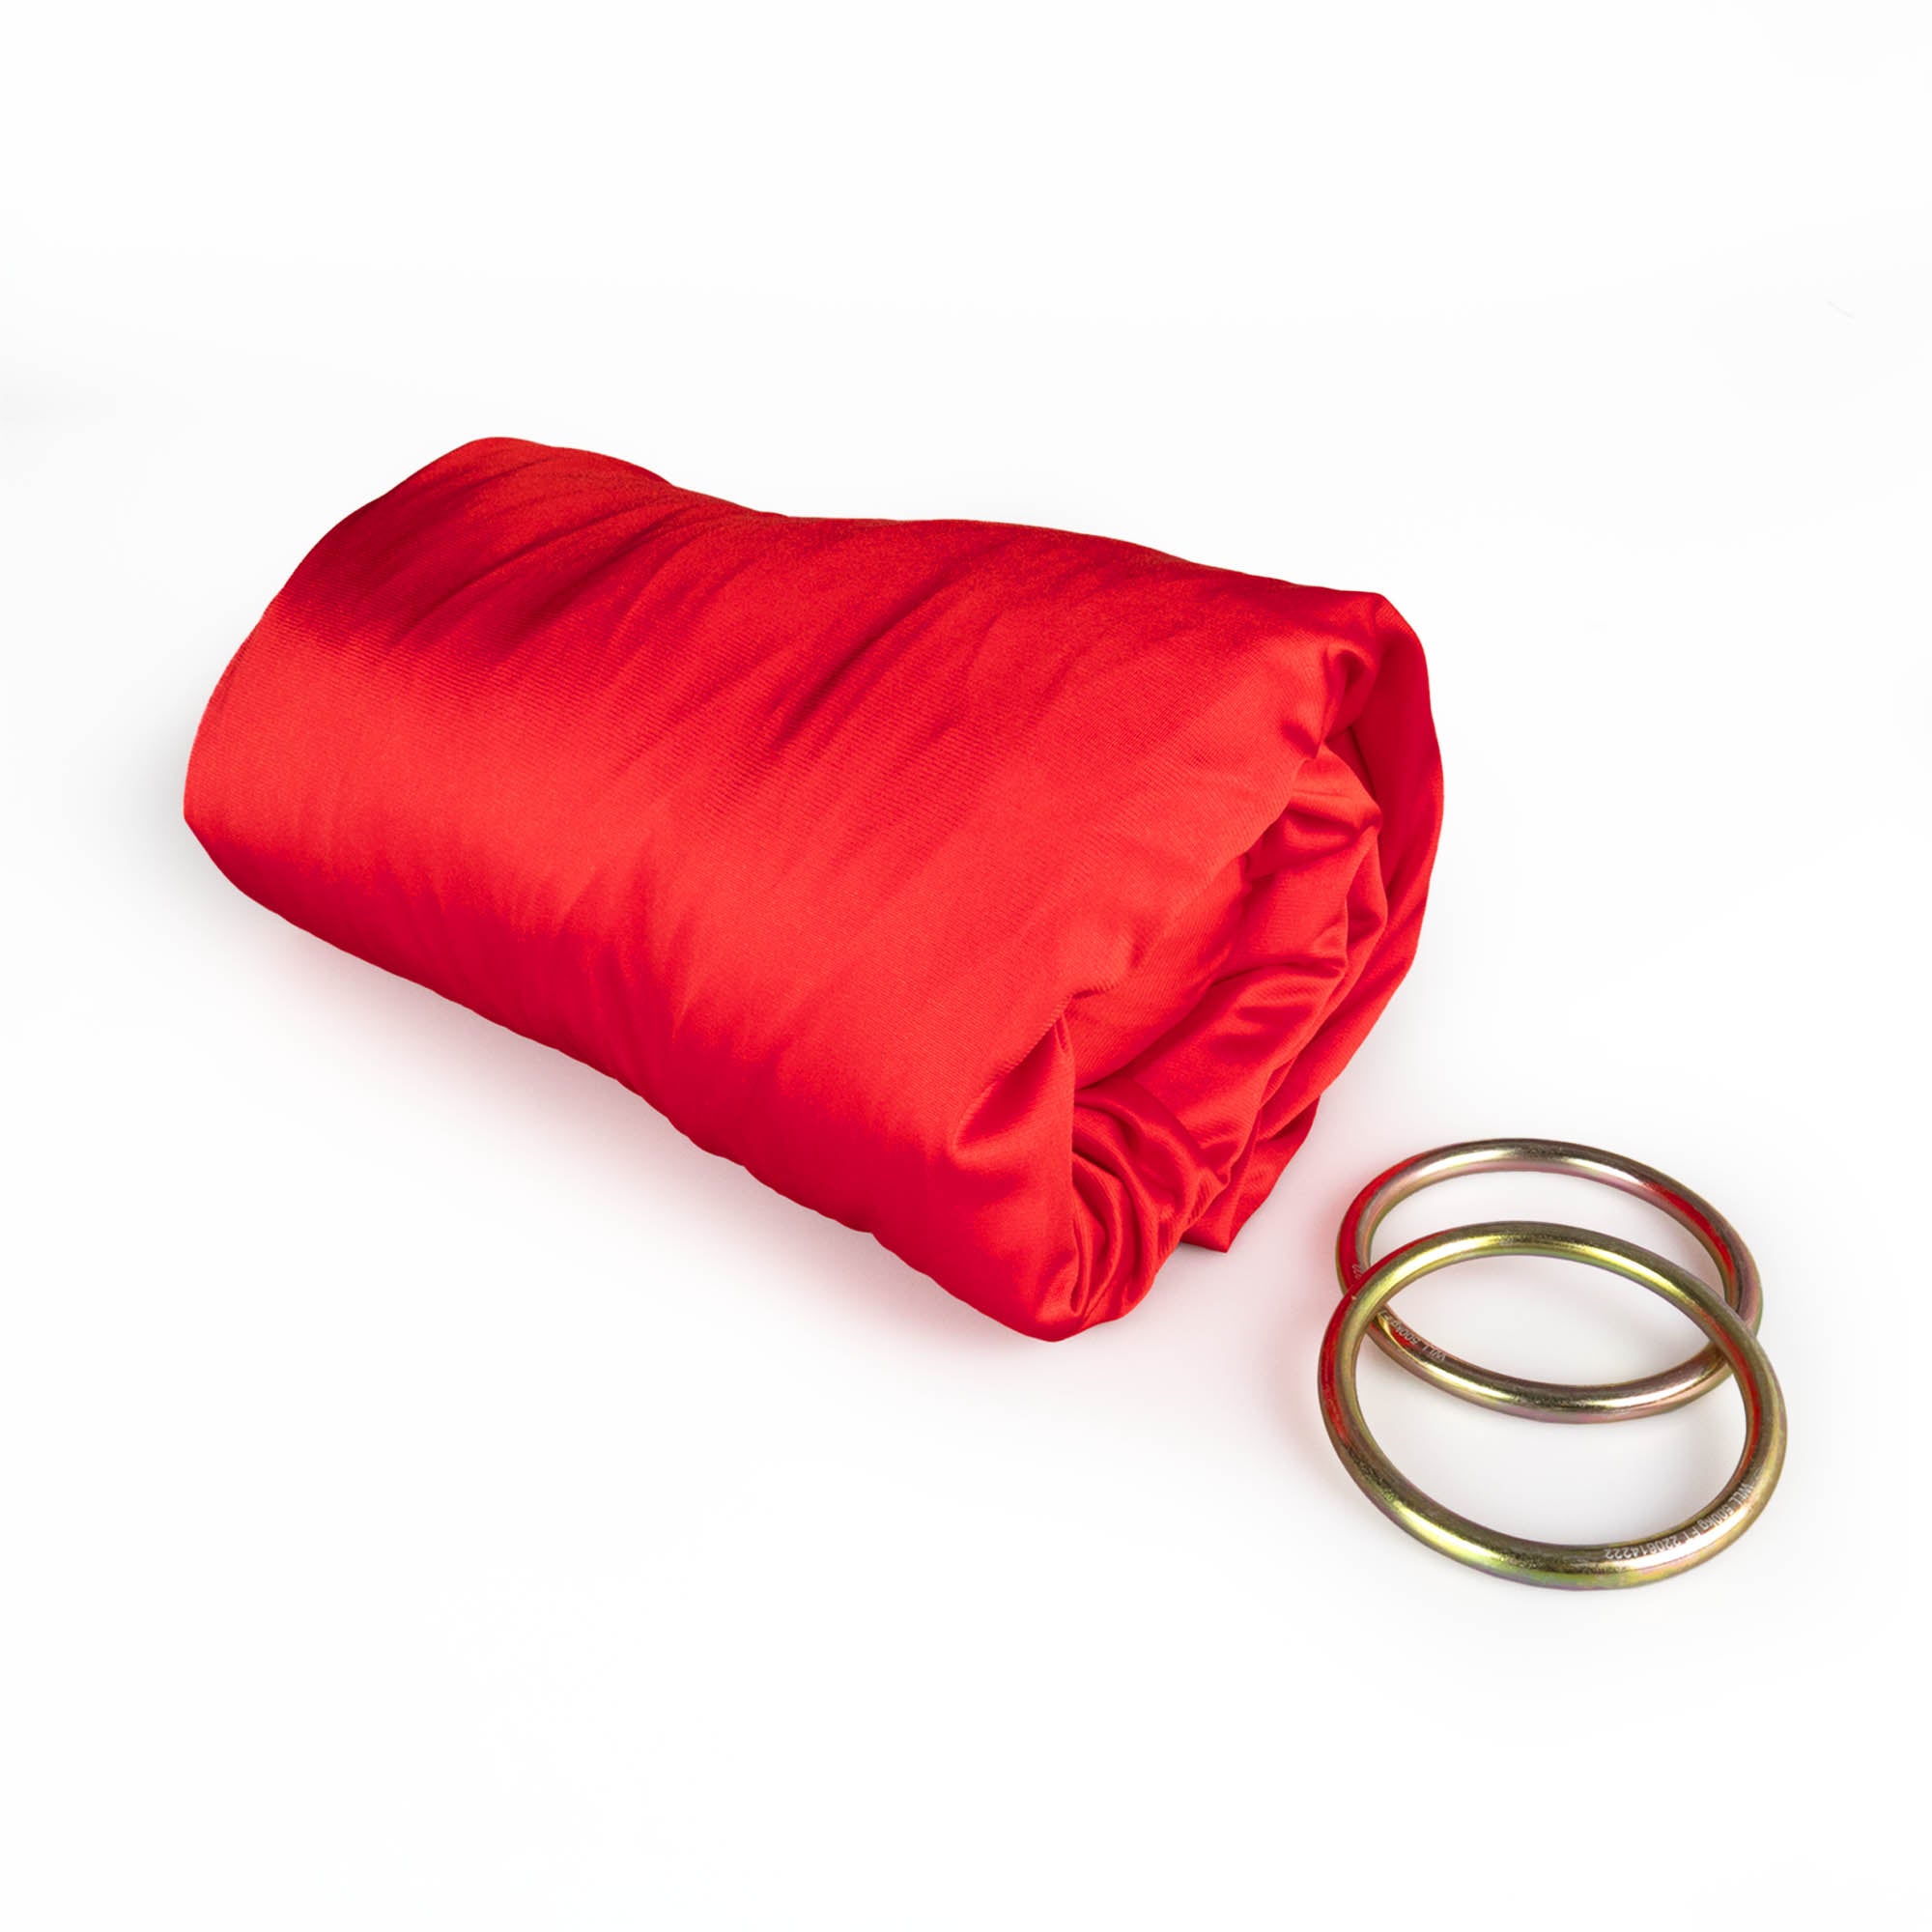 Red yoga hammock with O rings detached